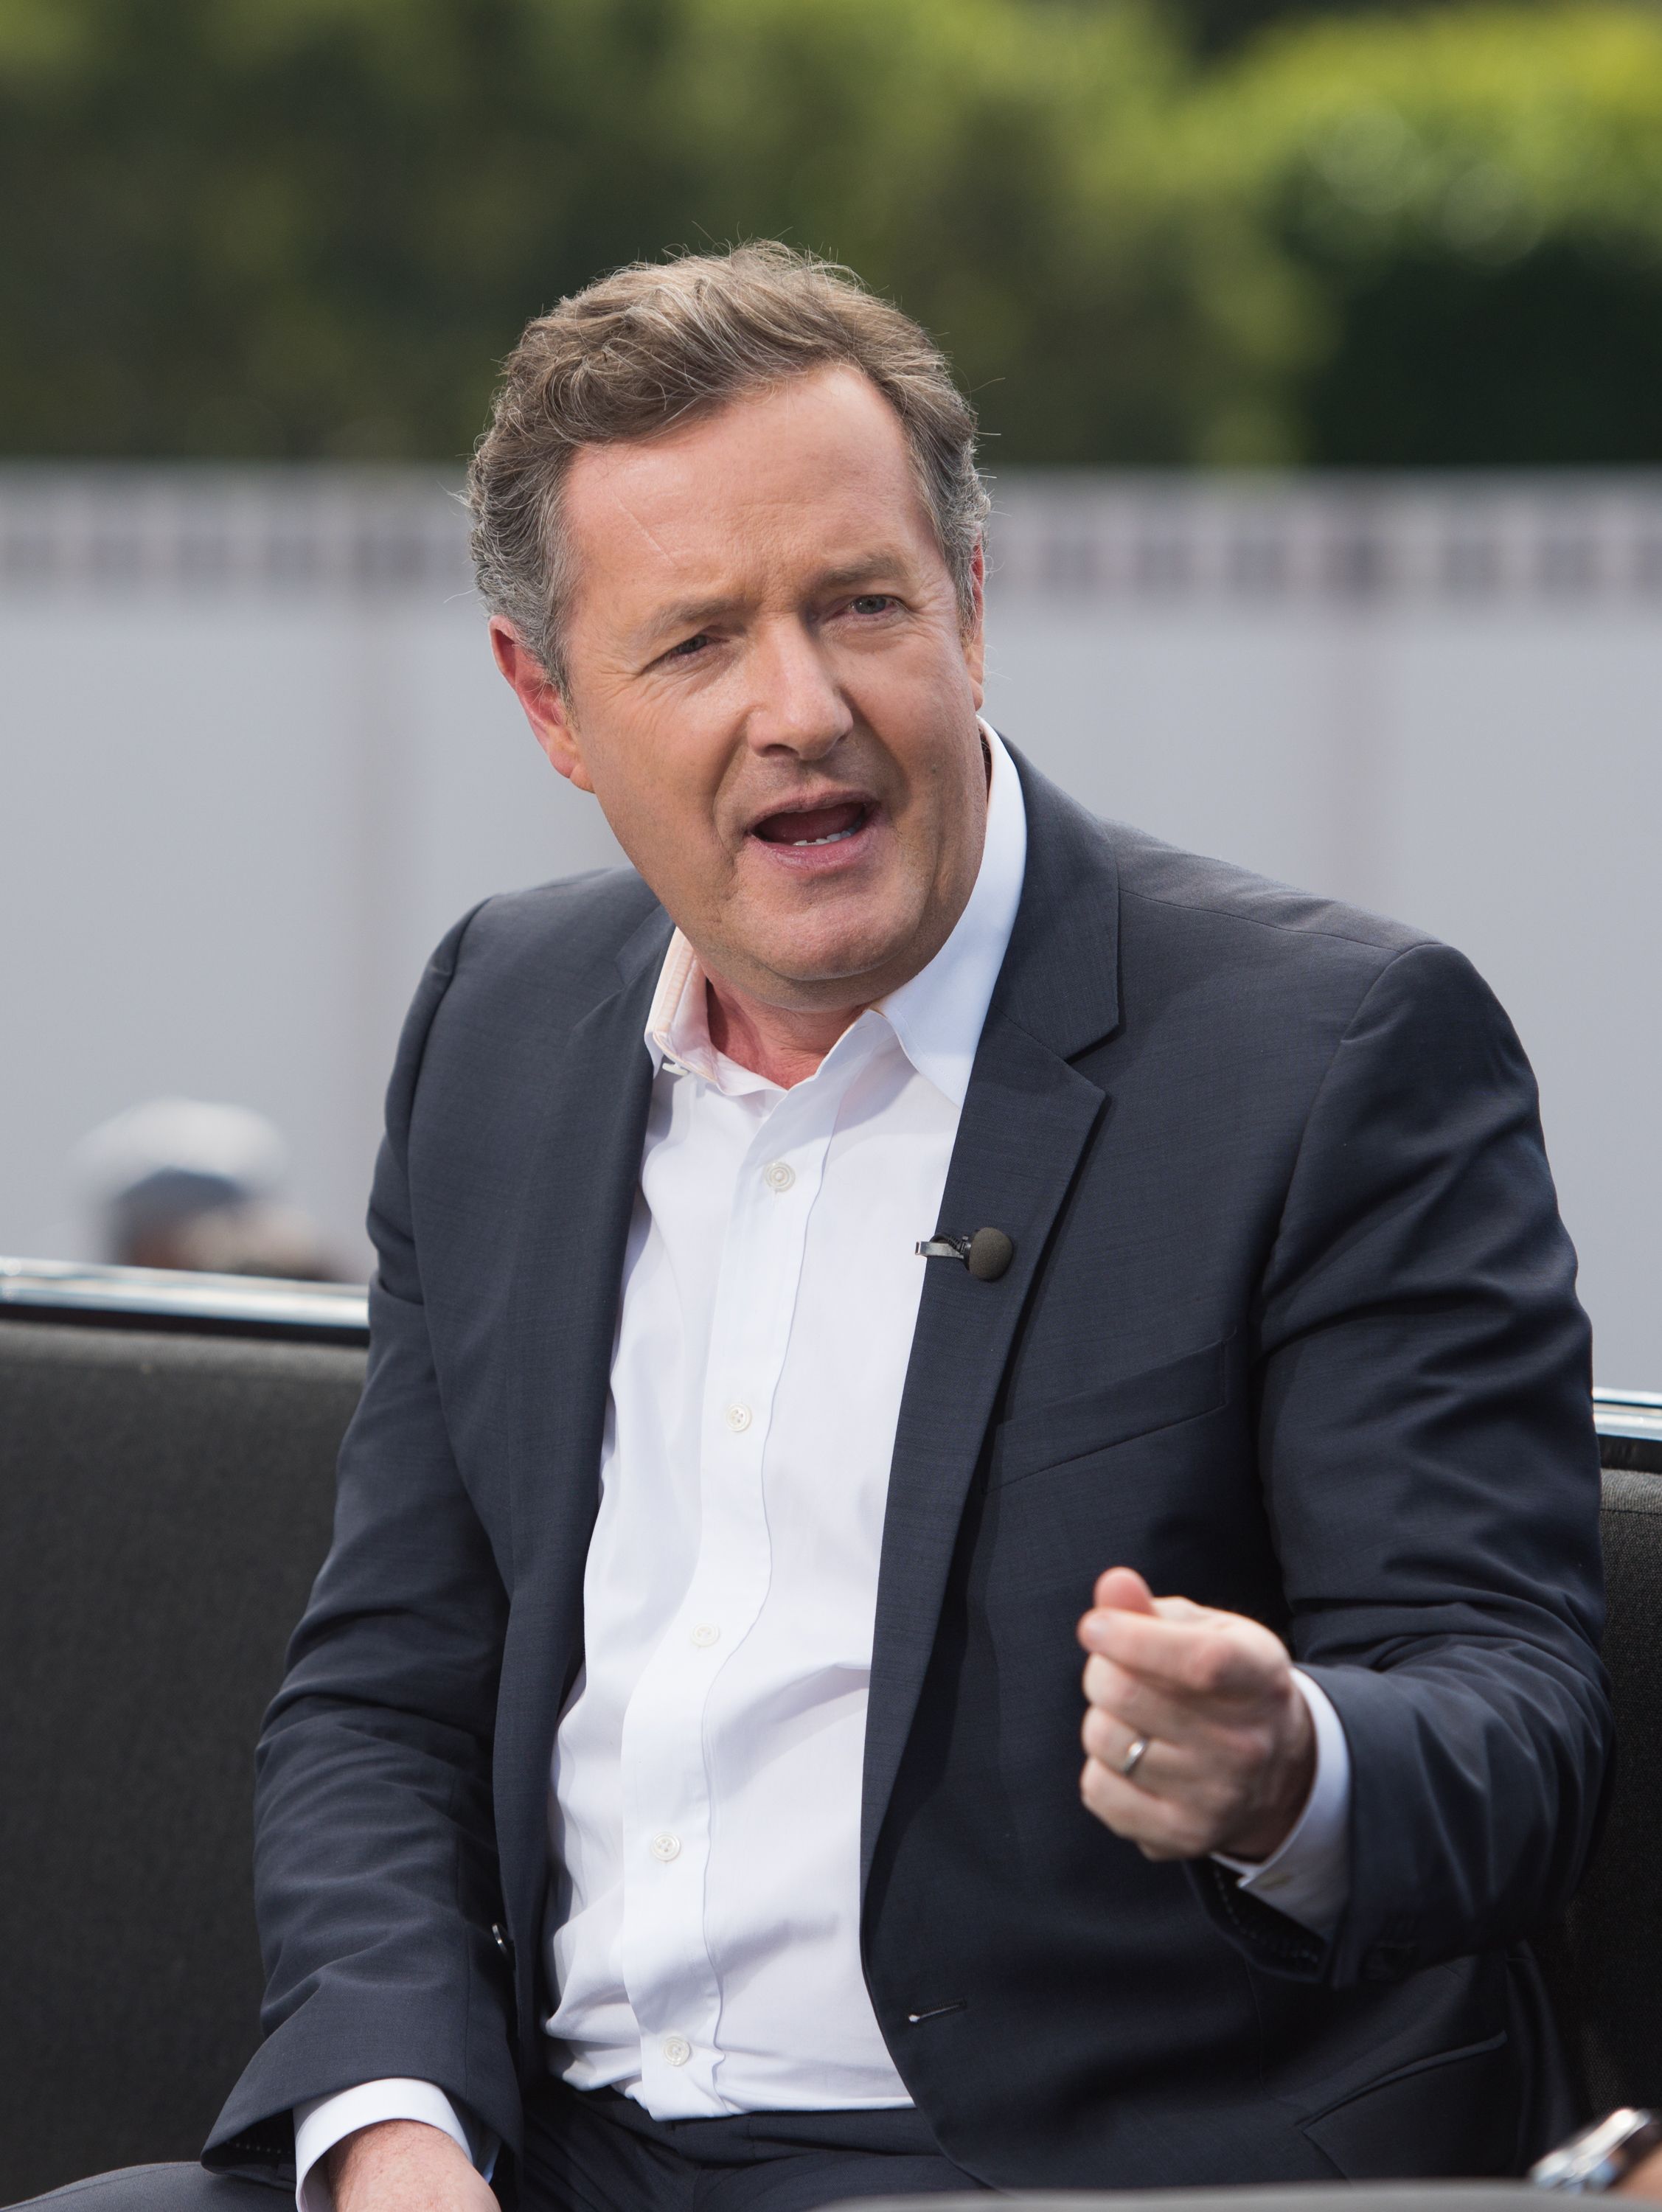 Piers Morgan visits "Extra" at Universal Studios Hollywood on February 11, 2016, in Universal City, California | Photo: Noel Vasquez/Getty Images